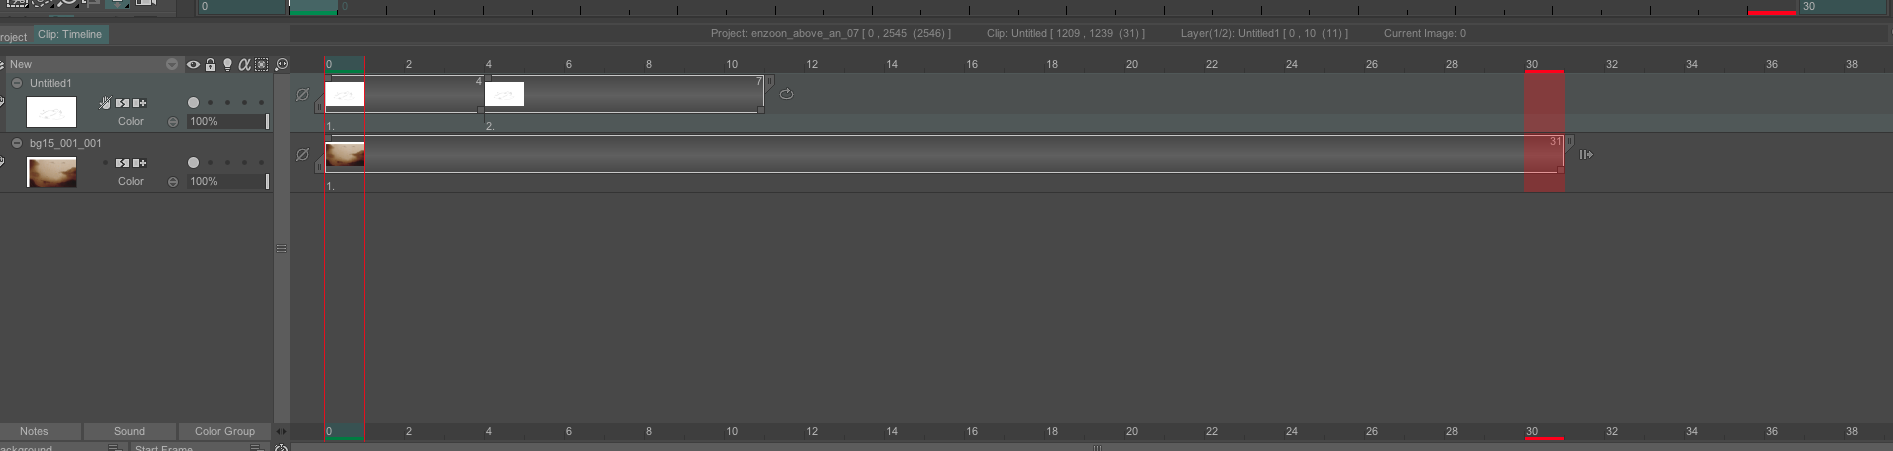 Here is how I have to change it in order to render until frame 30.